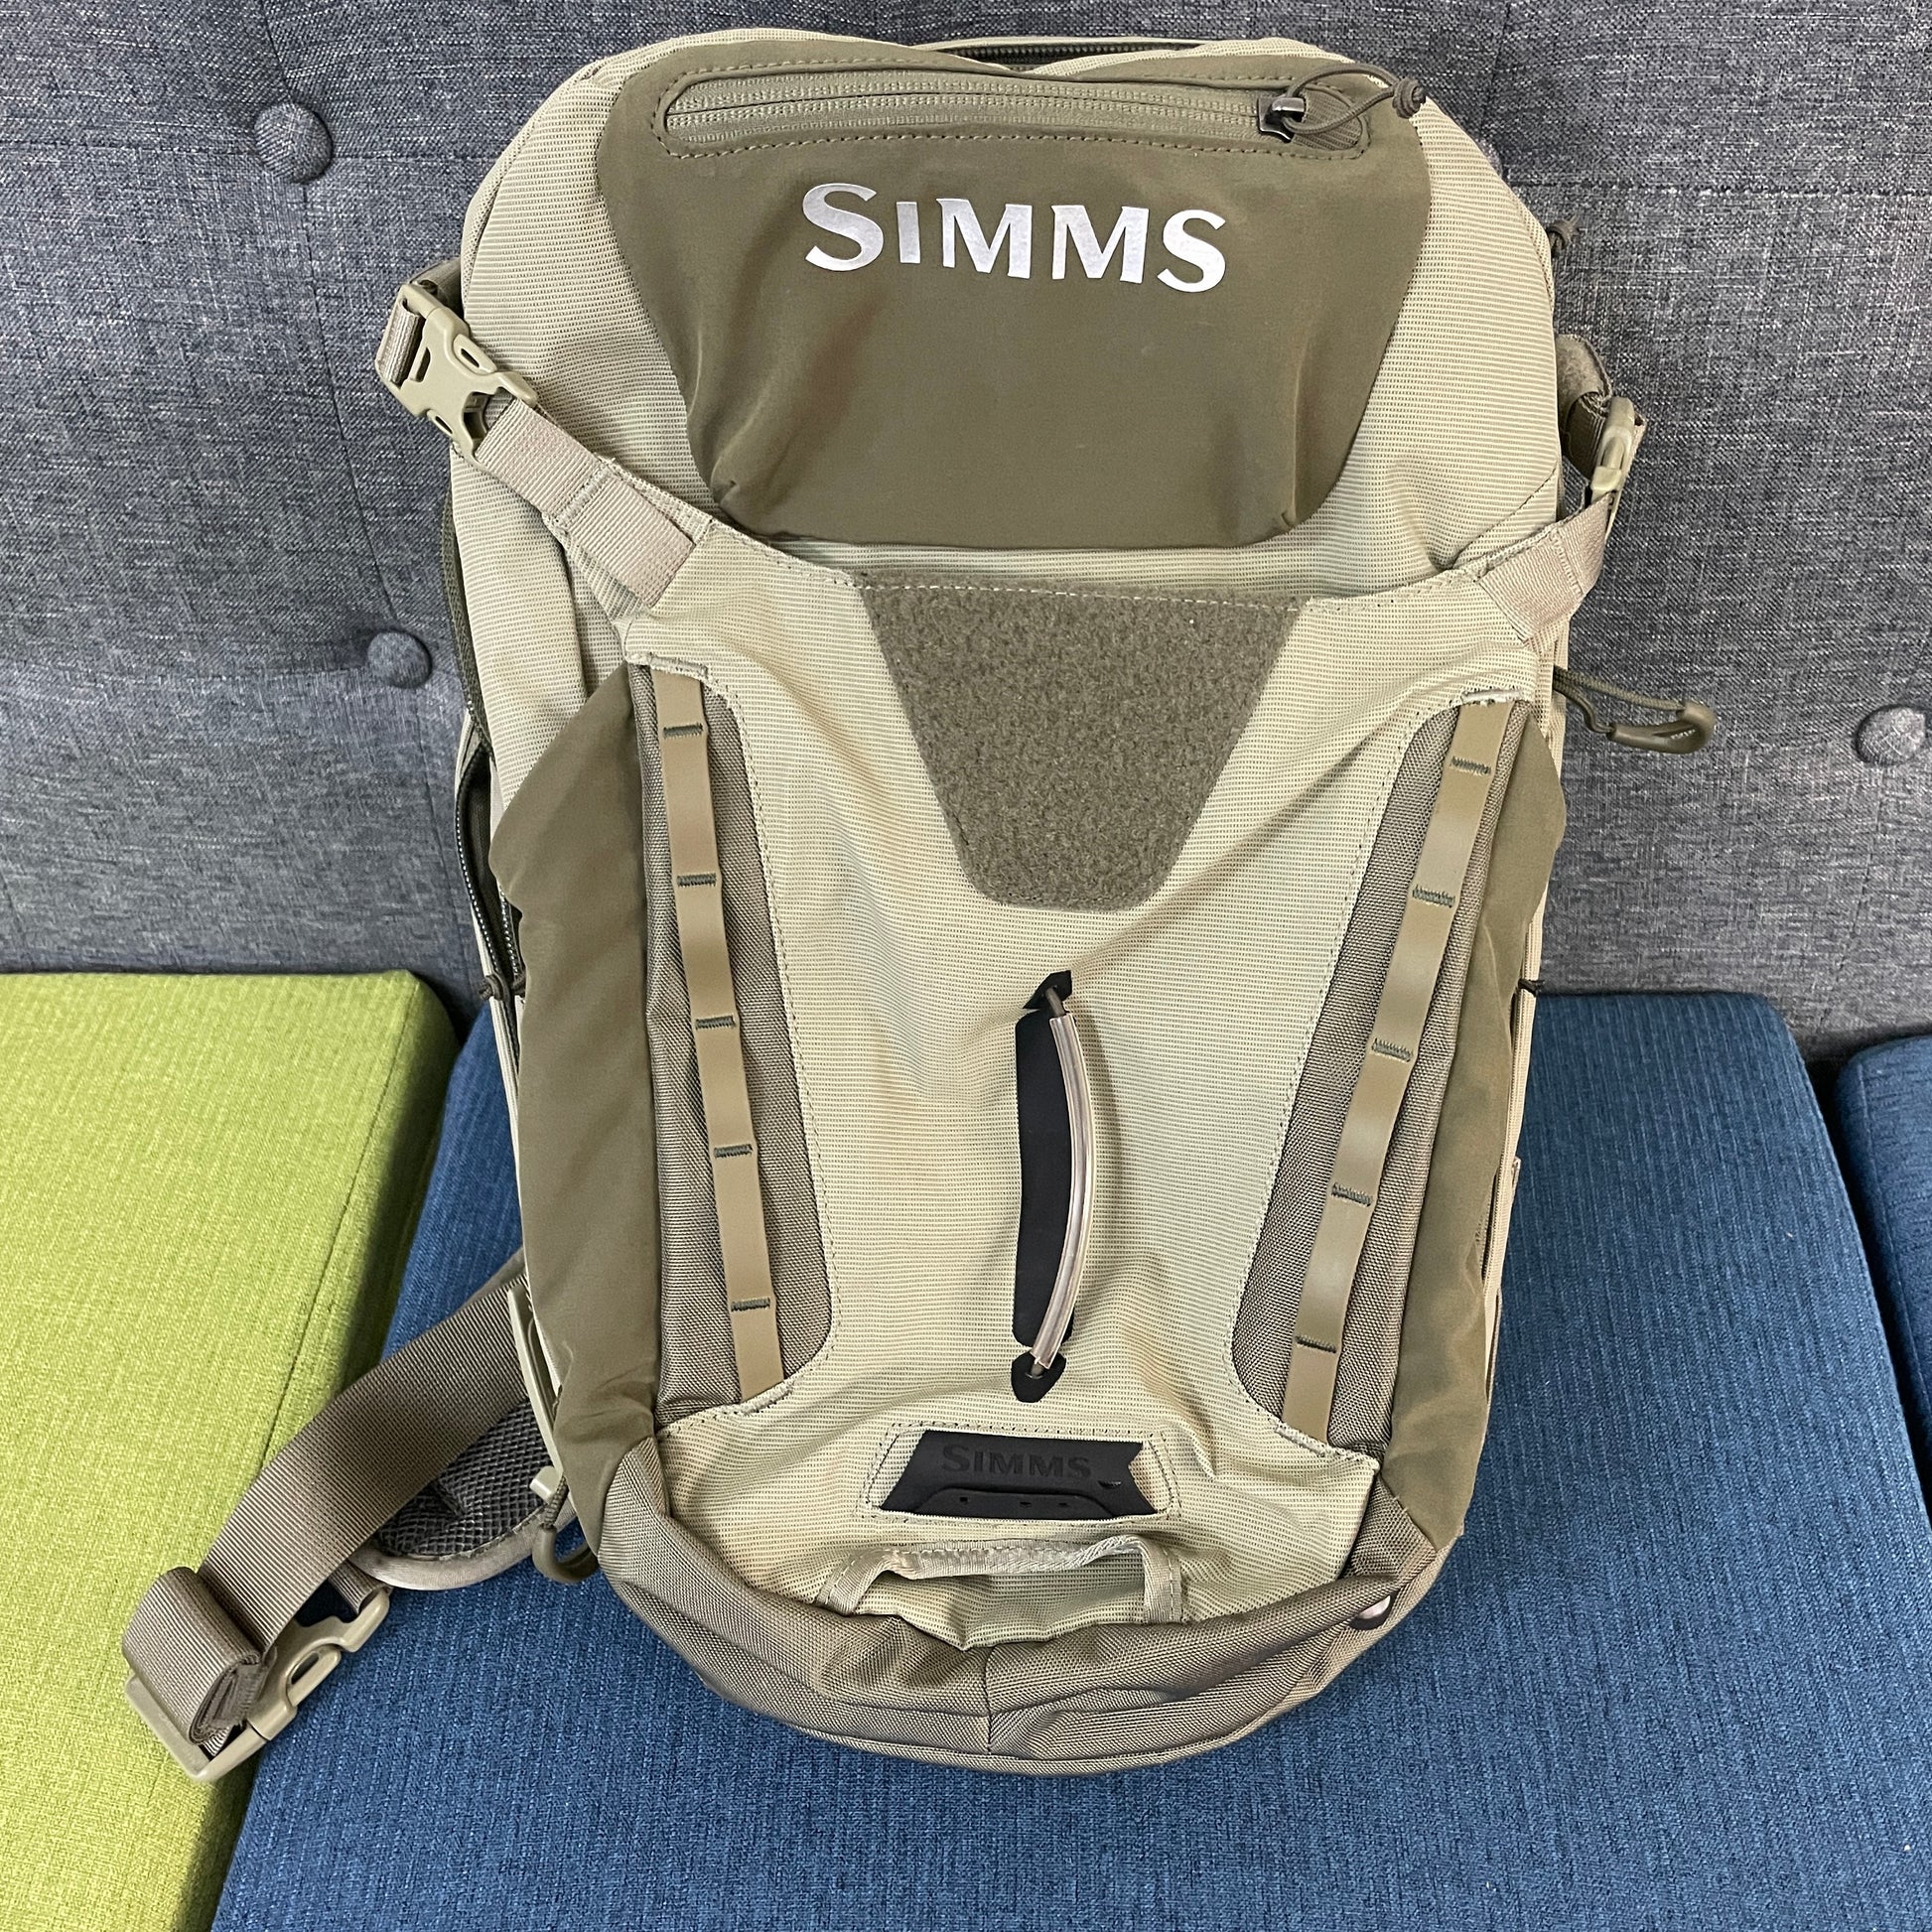 Simms Freestone Ambidextrous Tactical Fishing Sling Pack, Water